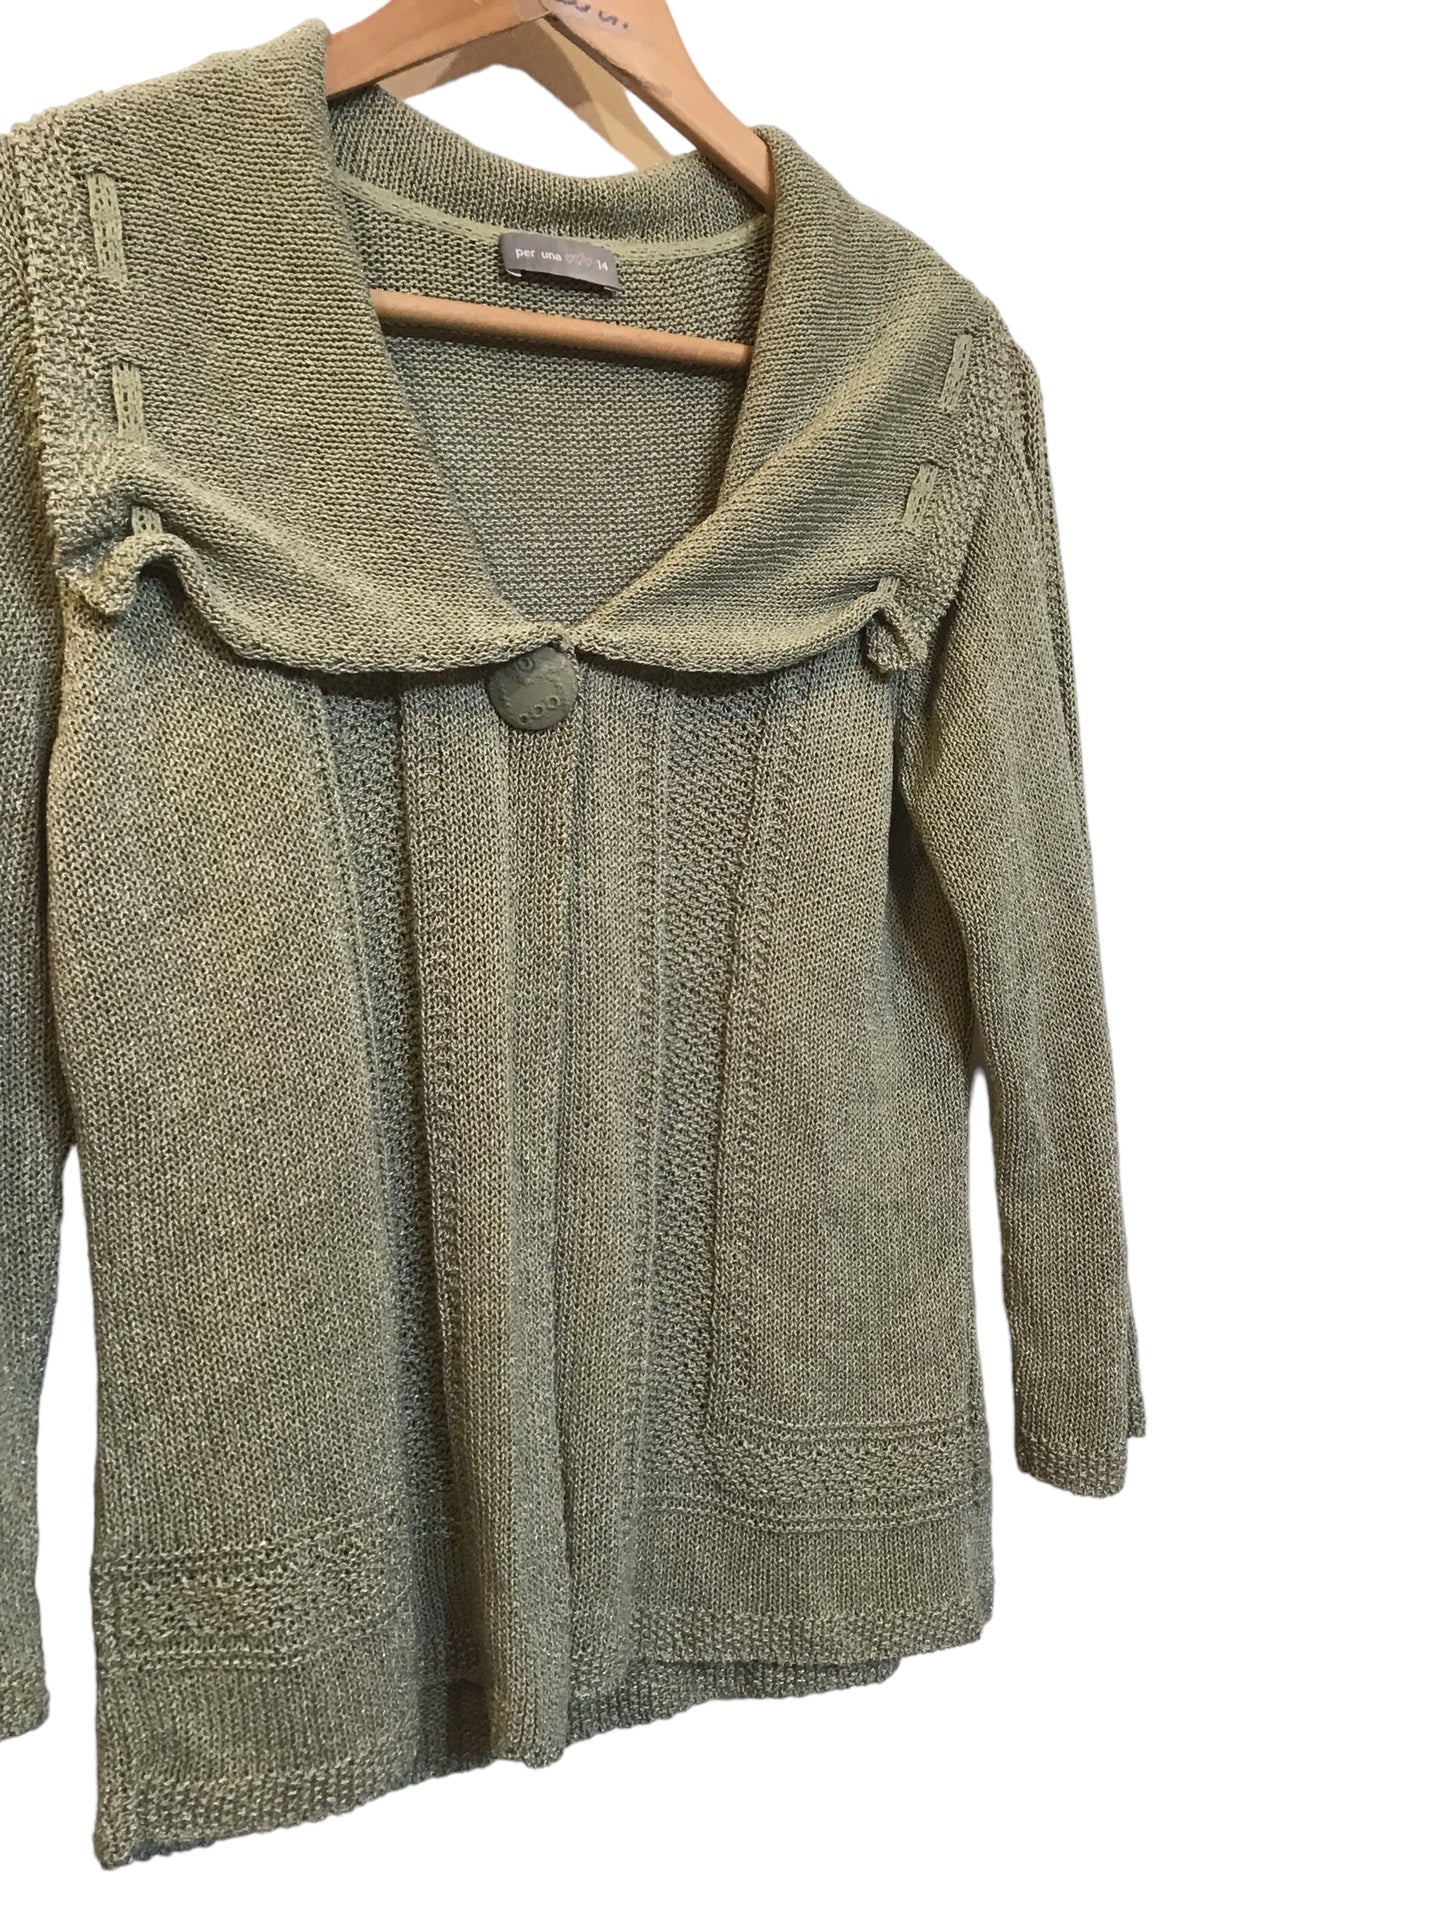 Green Knitted Cardigan (Size L)